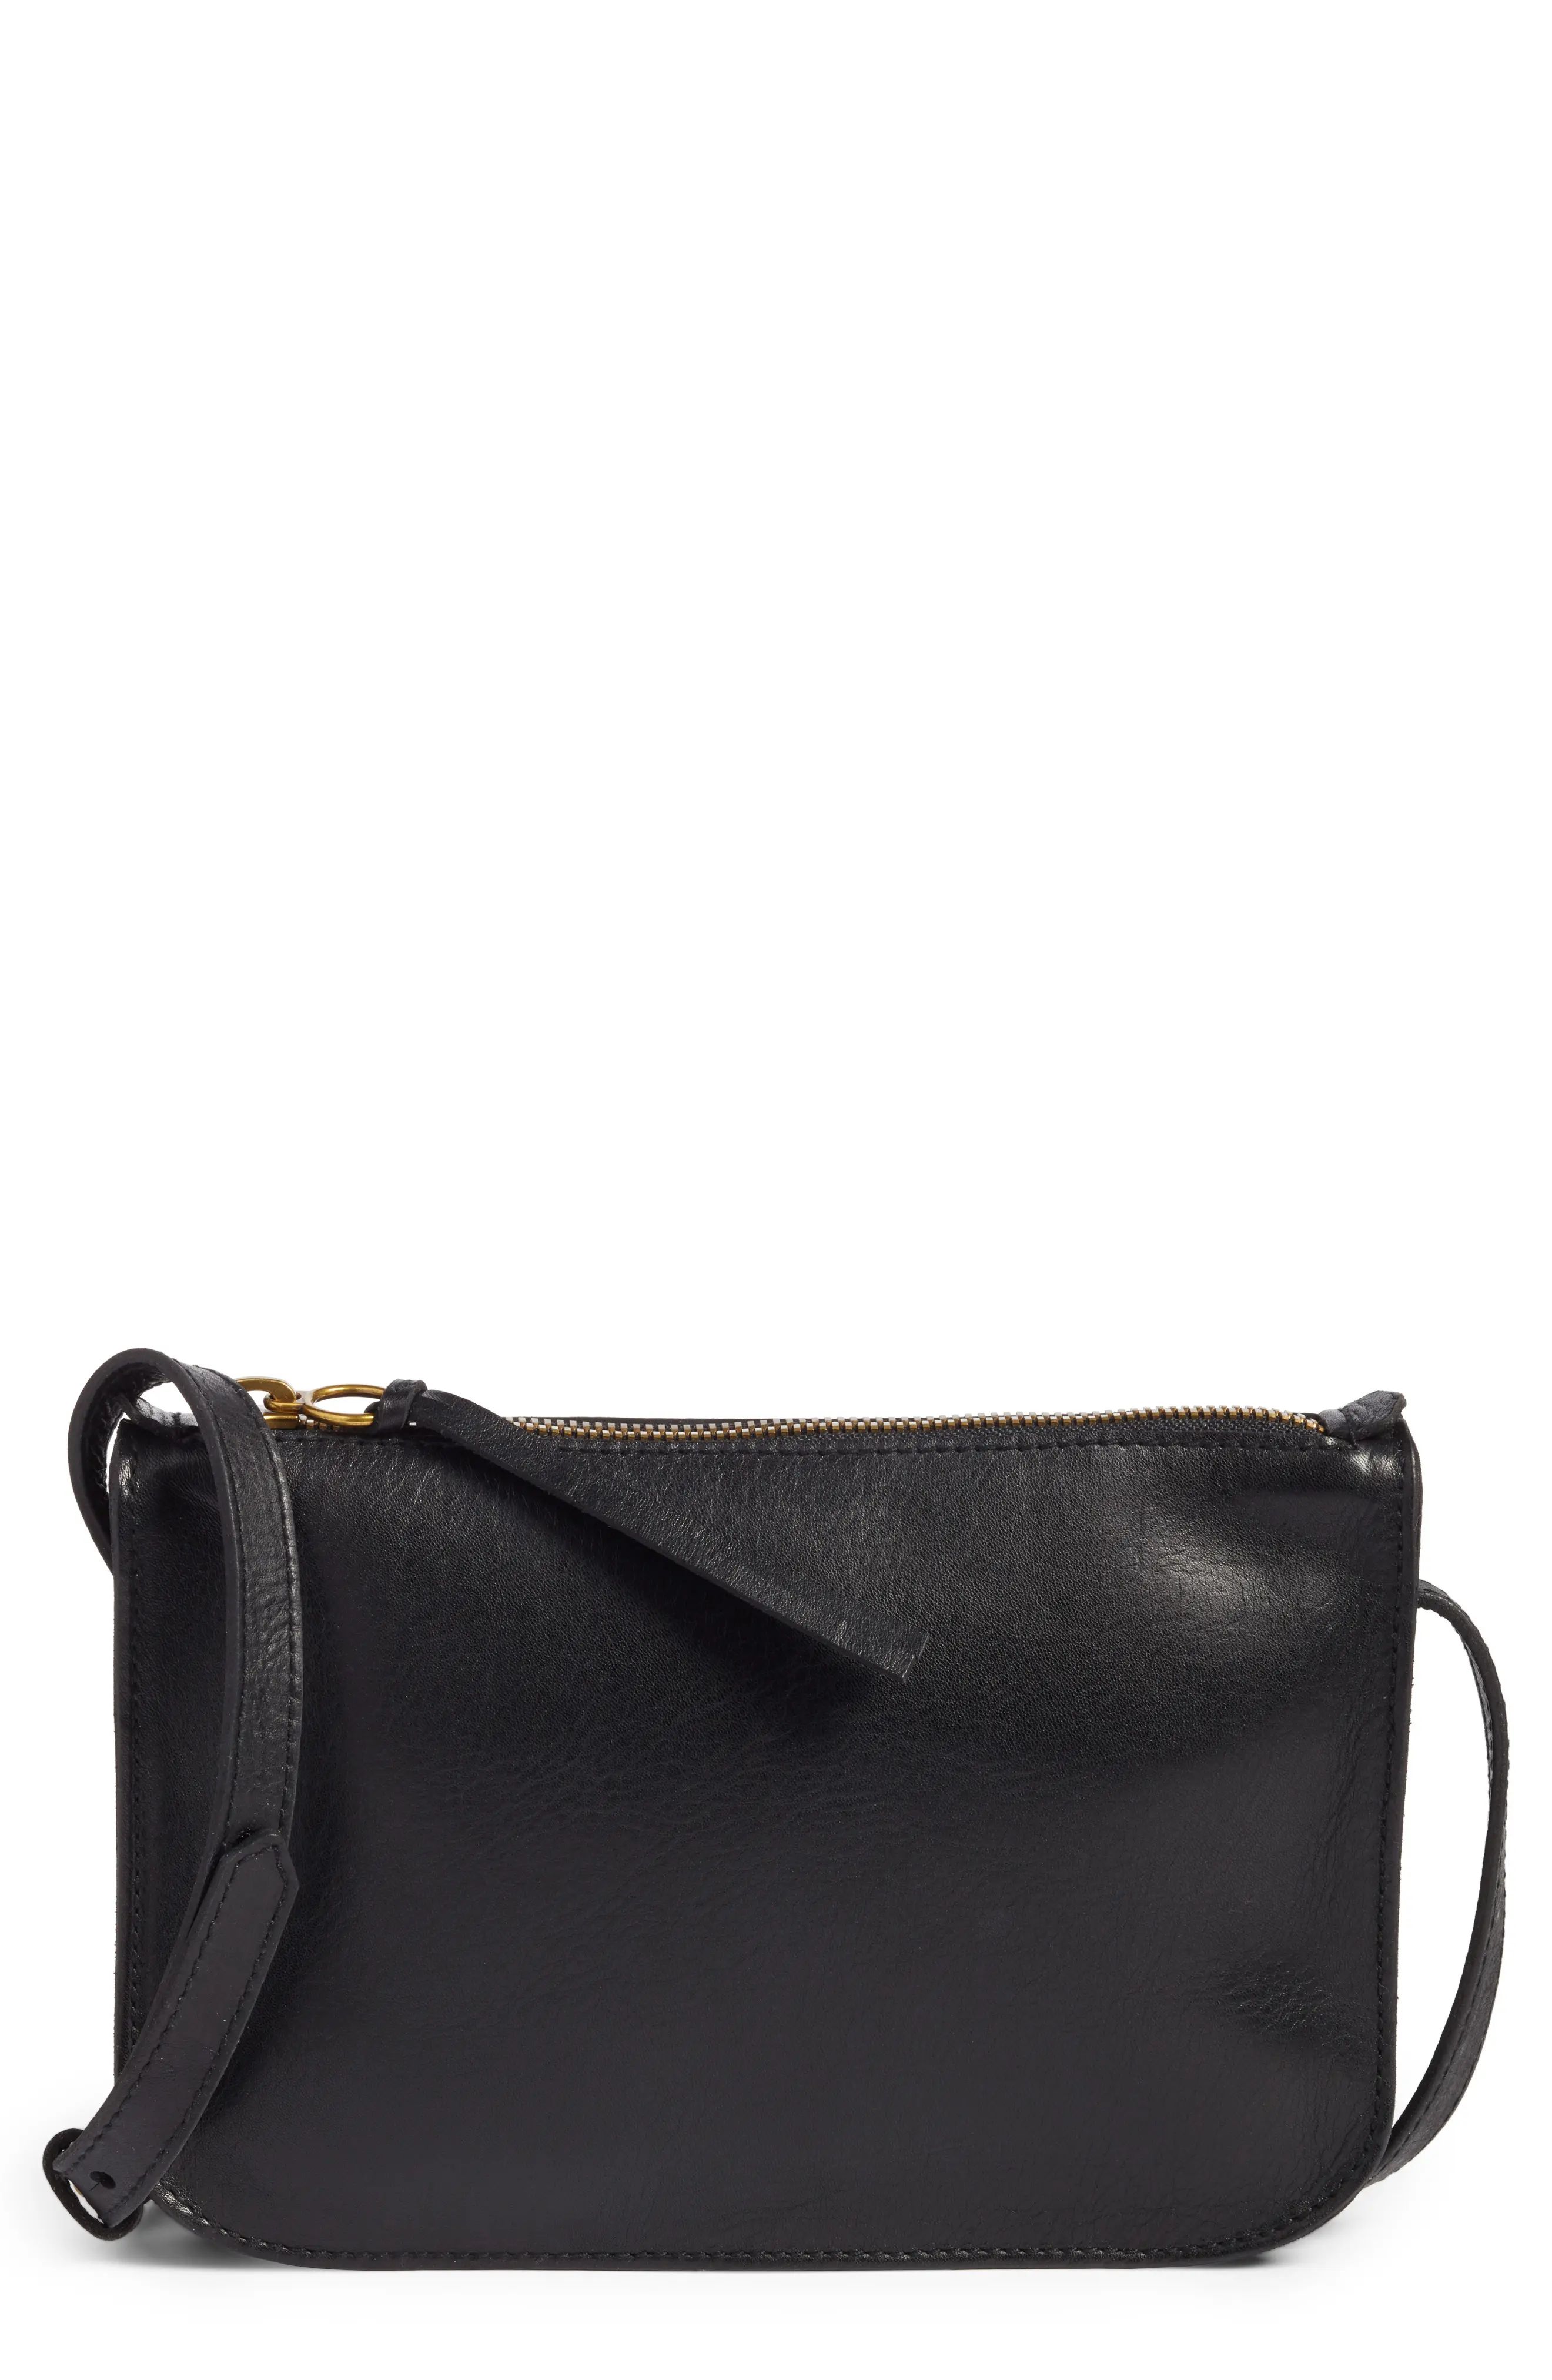 The Simple Leather Crossbody Bag | Nordstrom